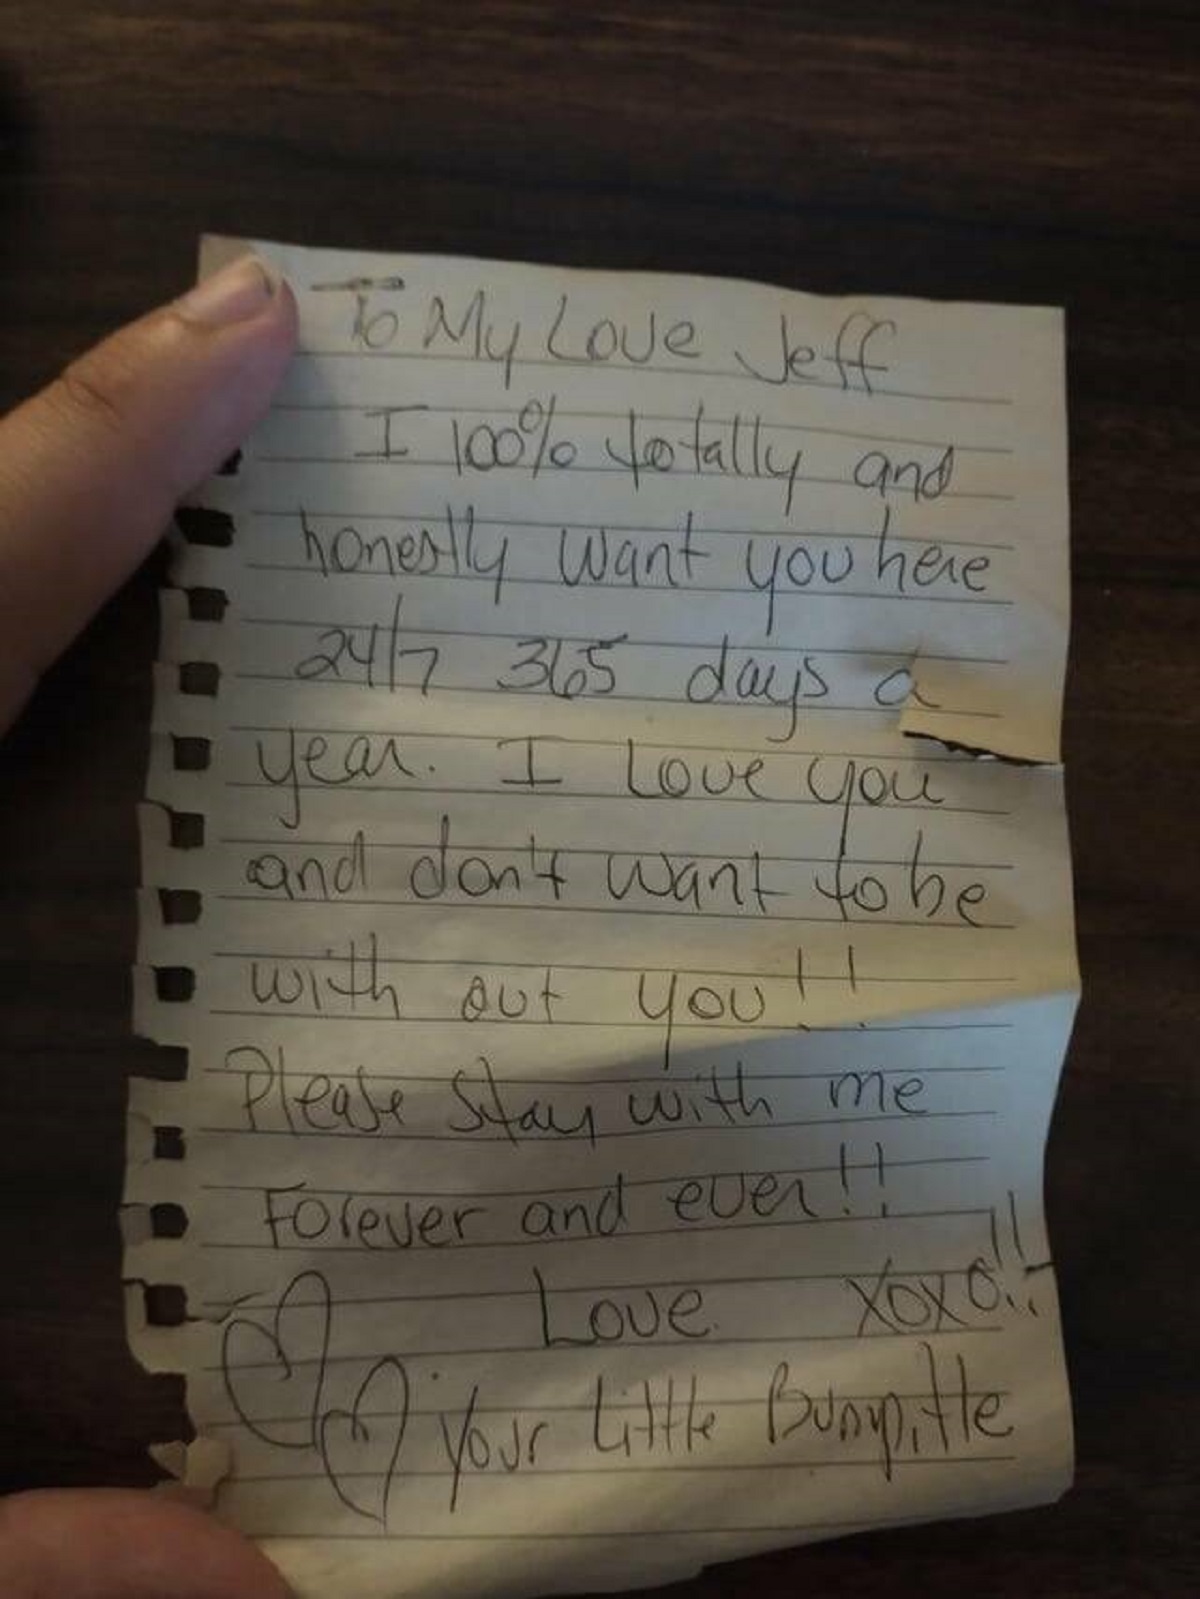 "While cleaning out my car I found a love note from the previous owner"